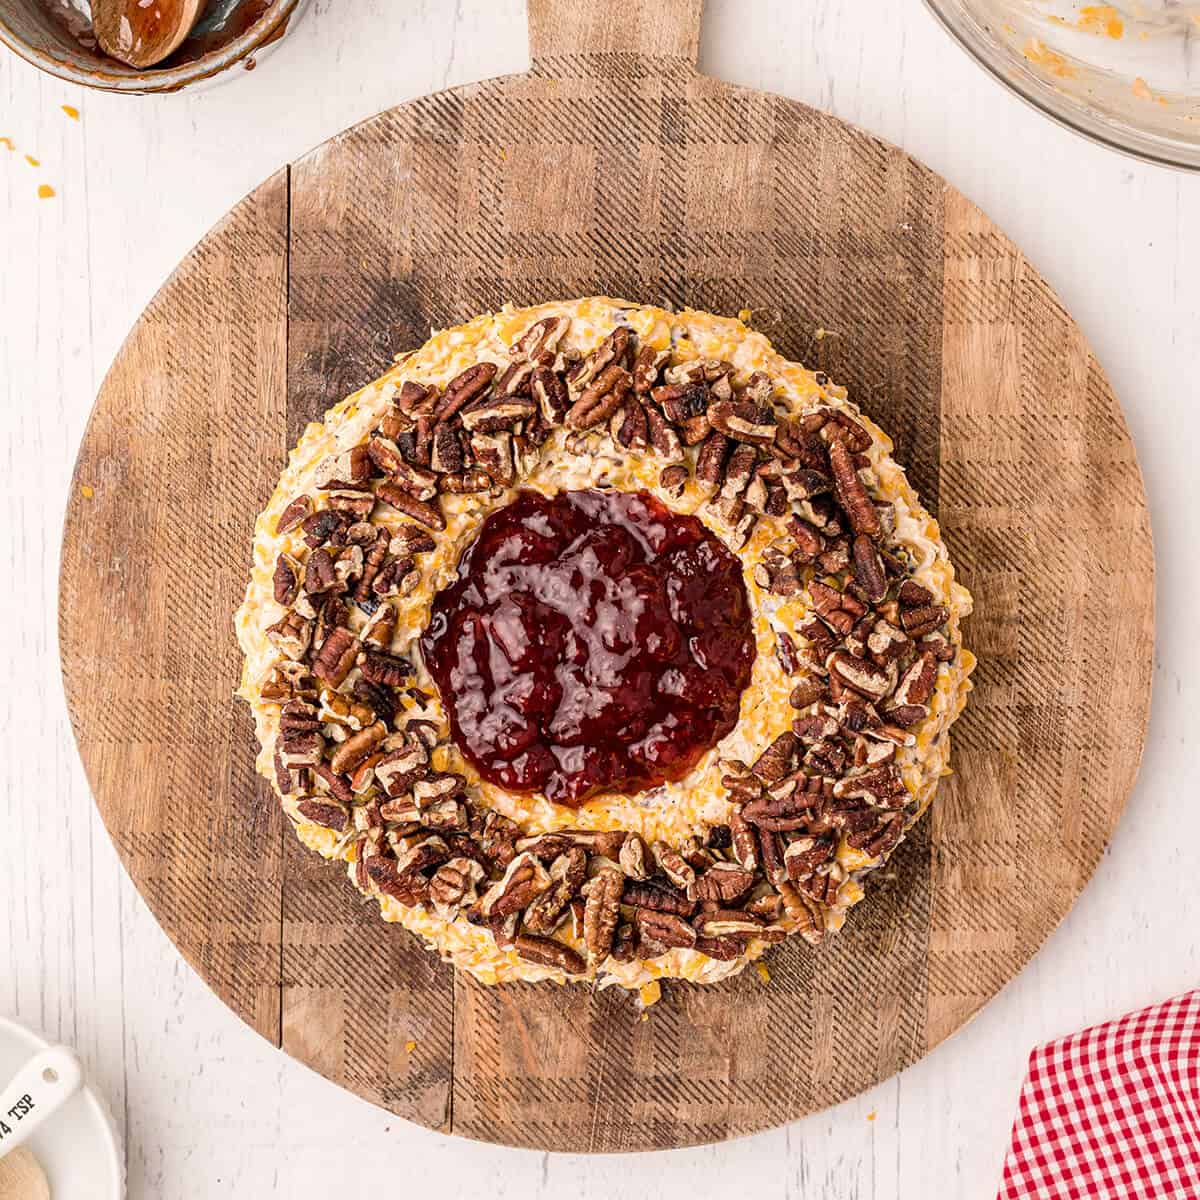 Cheese ring with preserves and pecans added.